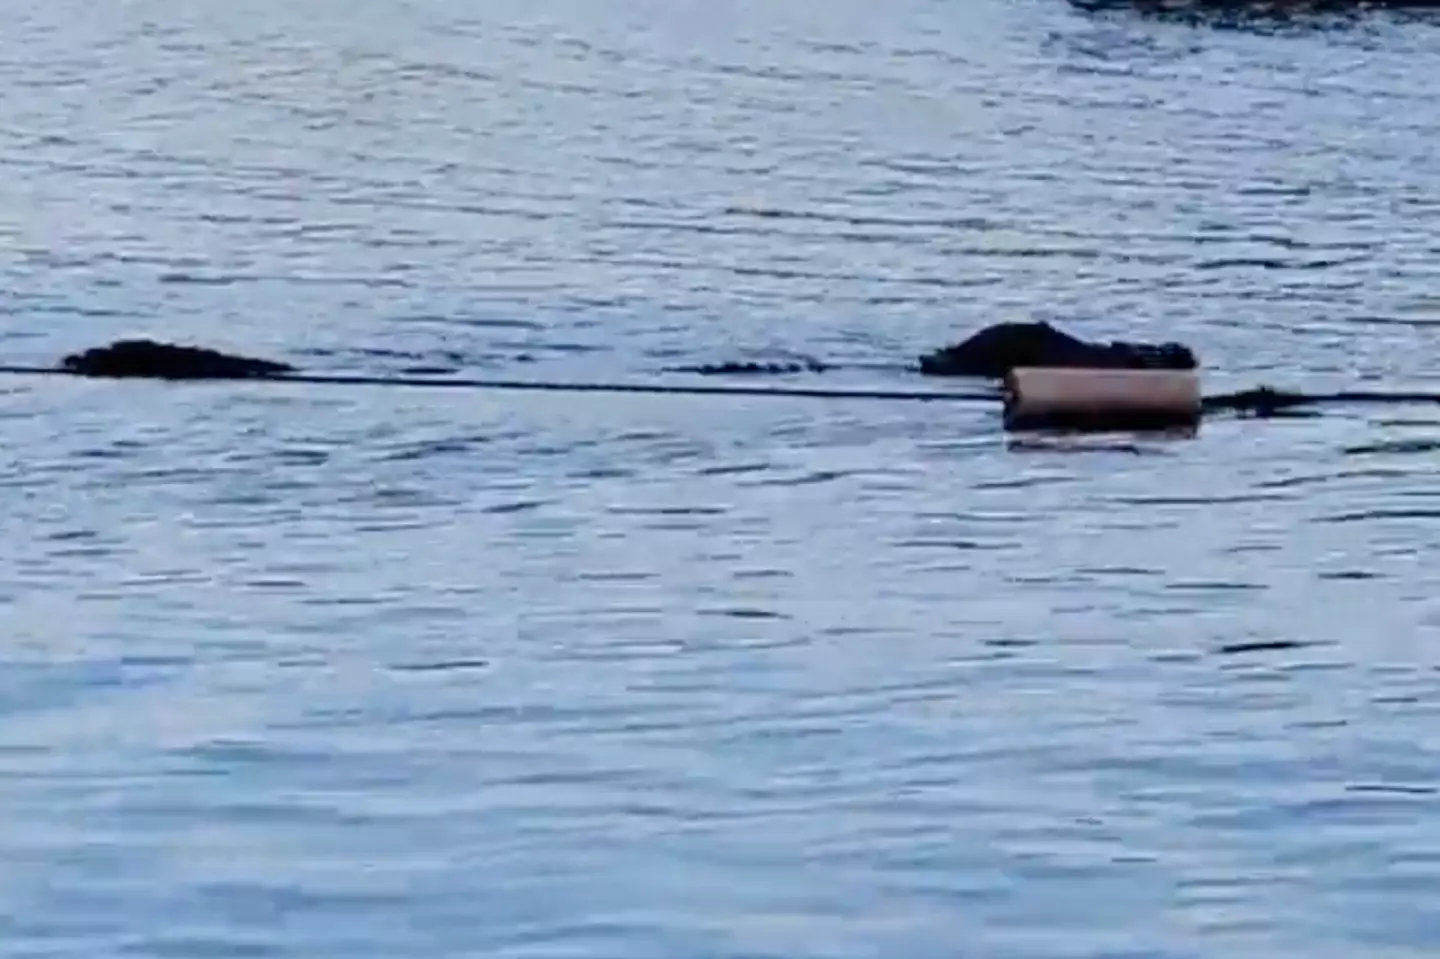 The gator was spotted lurking in the park lake.